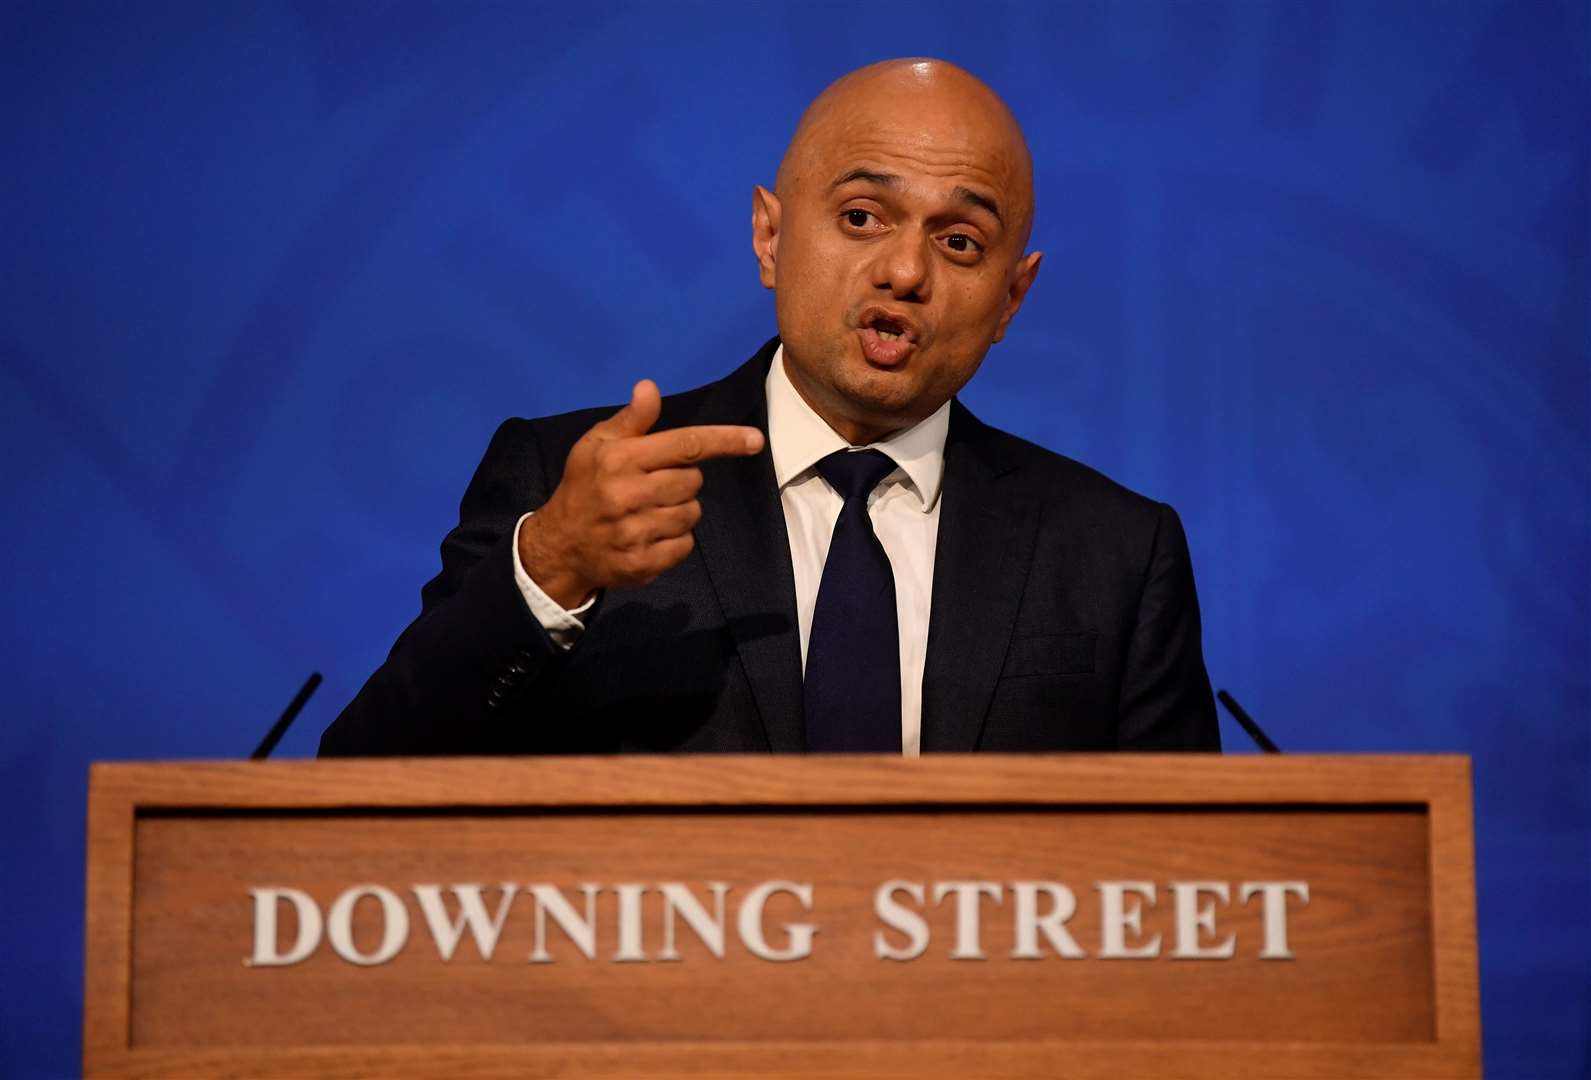 Health Secretary Sajid Javid had said on Wednesday that Tories should set a good example to society as a whole by wearing masks (Toby Melville/PA)